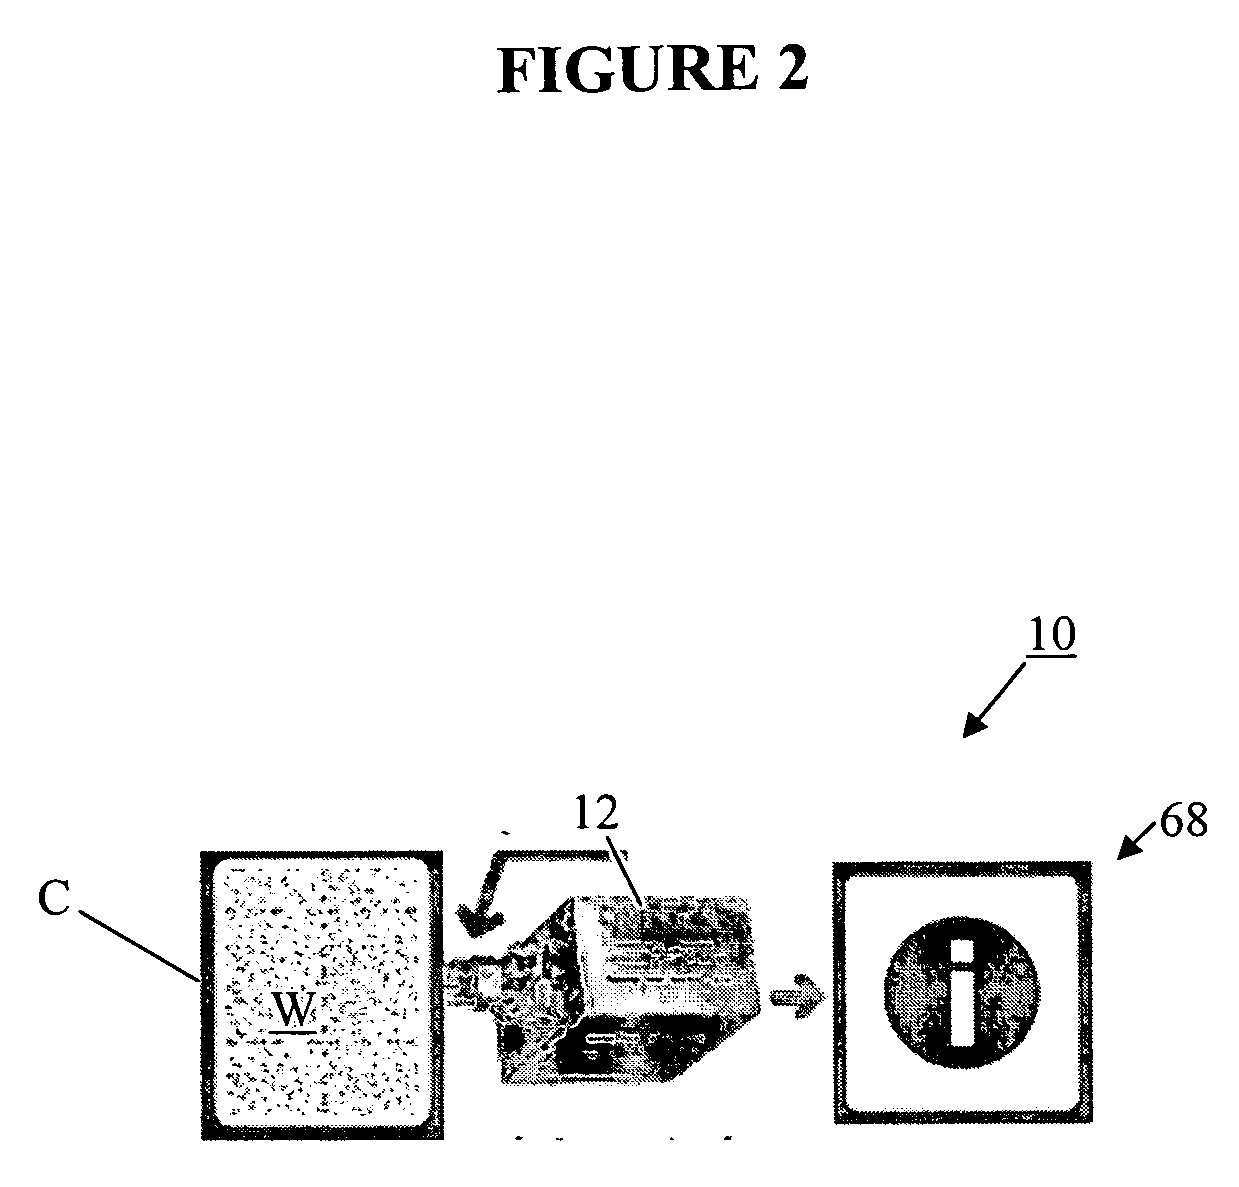 Methods of assessing and designing an application specific measurement system